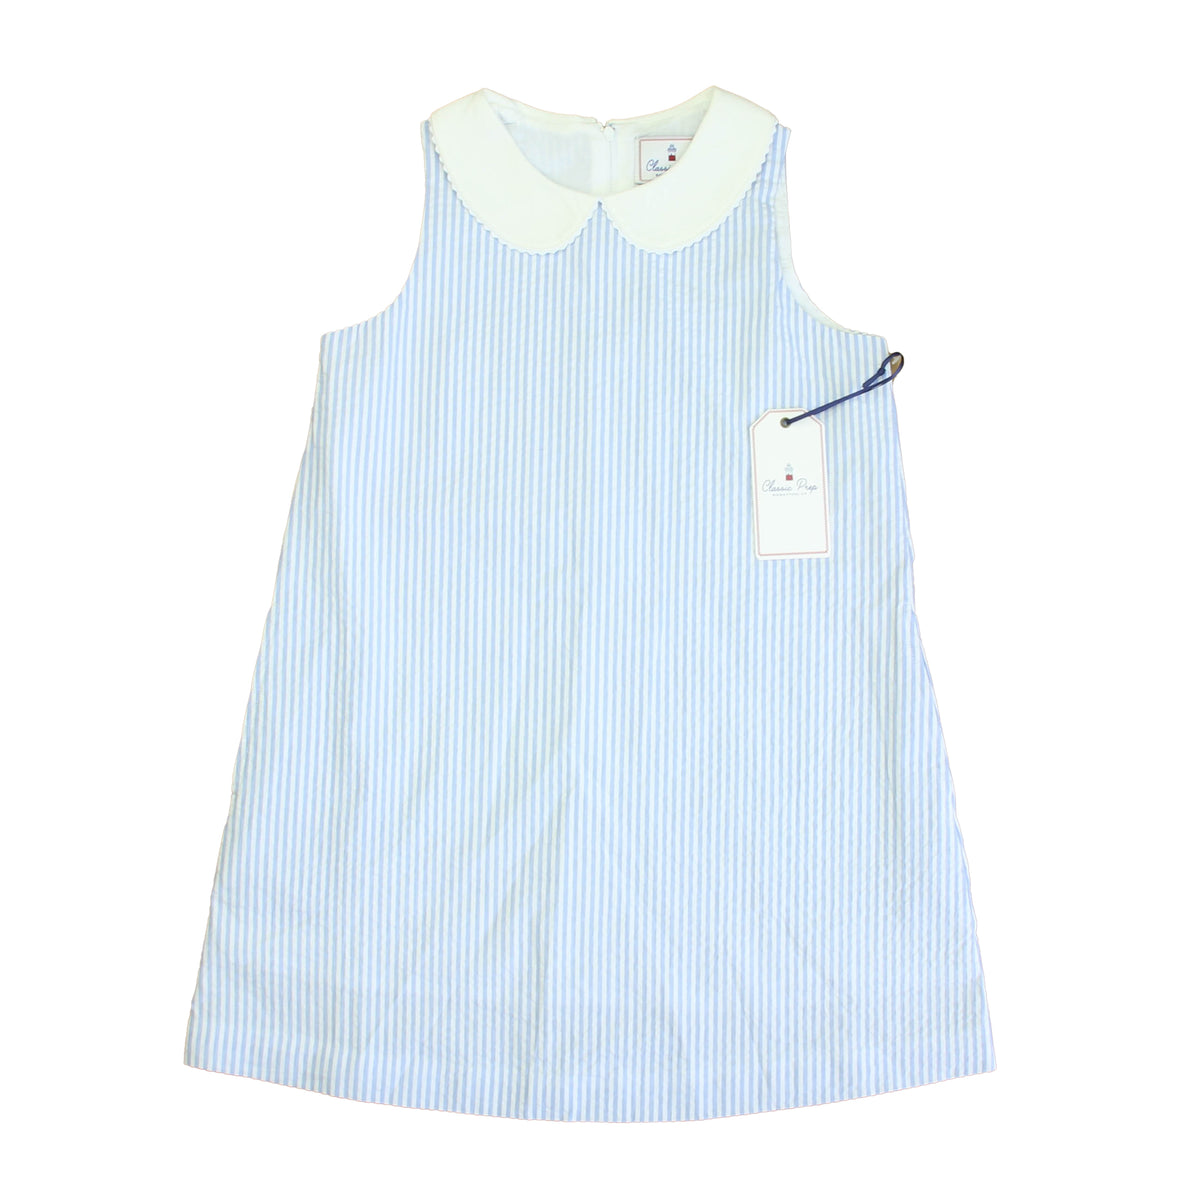 New with Tags: Blue and White Stripe Dress size: 6-14 Years -- FINAL SALE